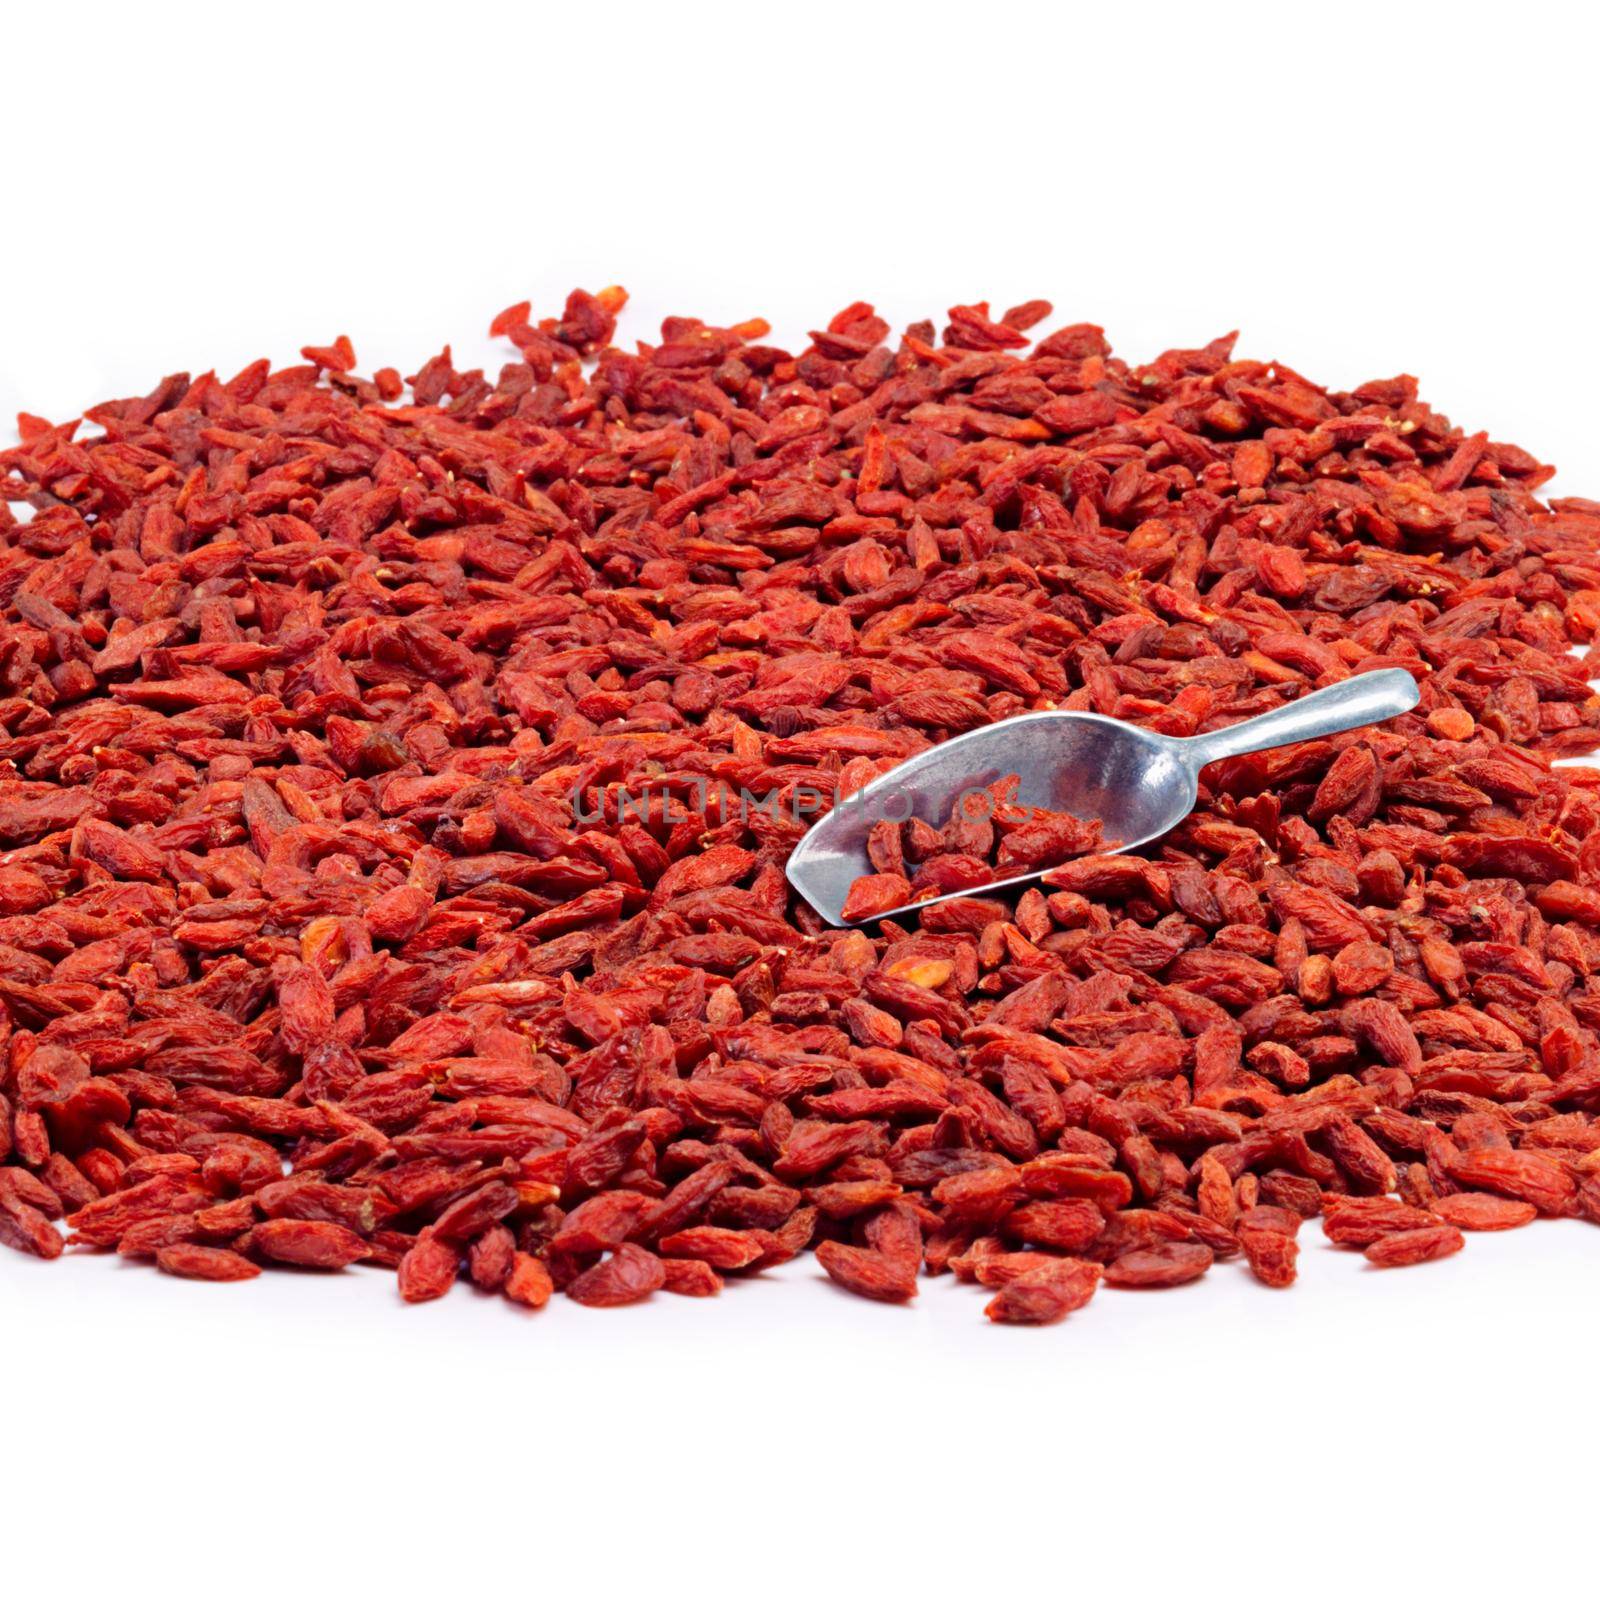 Get some goji power. Studio shot of a pile of goji berries with a metal scoop. by YuriArcurs